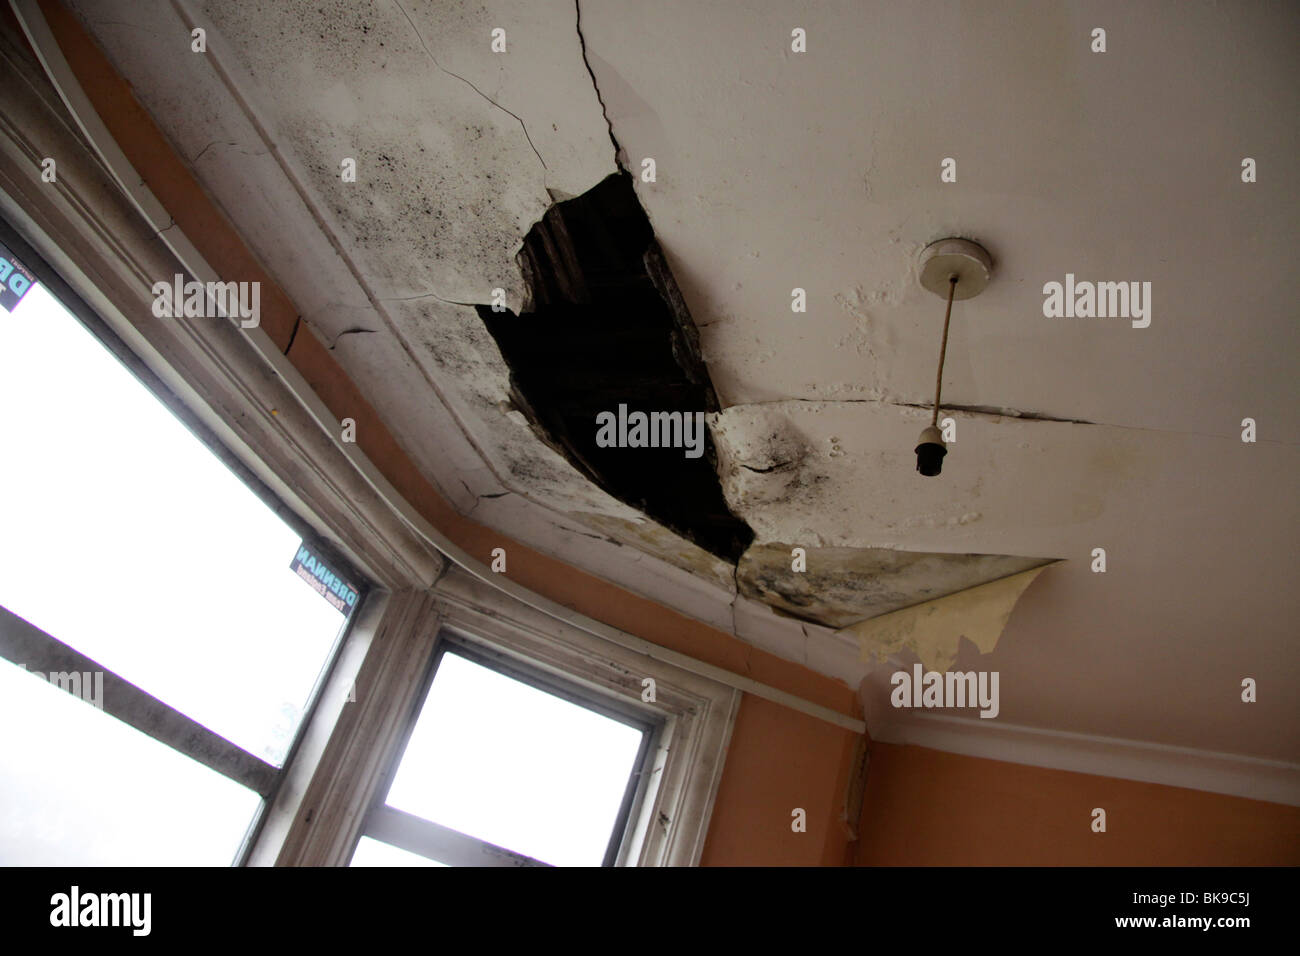 Water Damaged Ceiling From A Leaking Roof Stock Photo 29095966